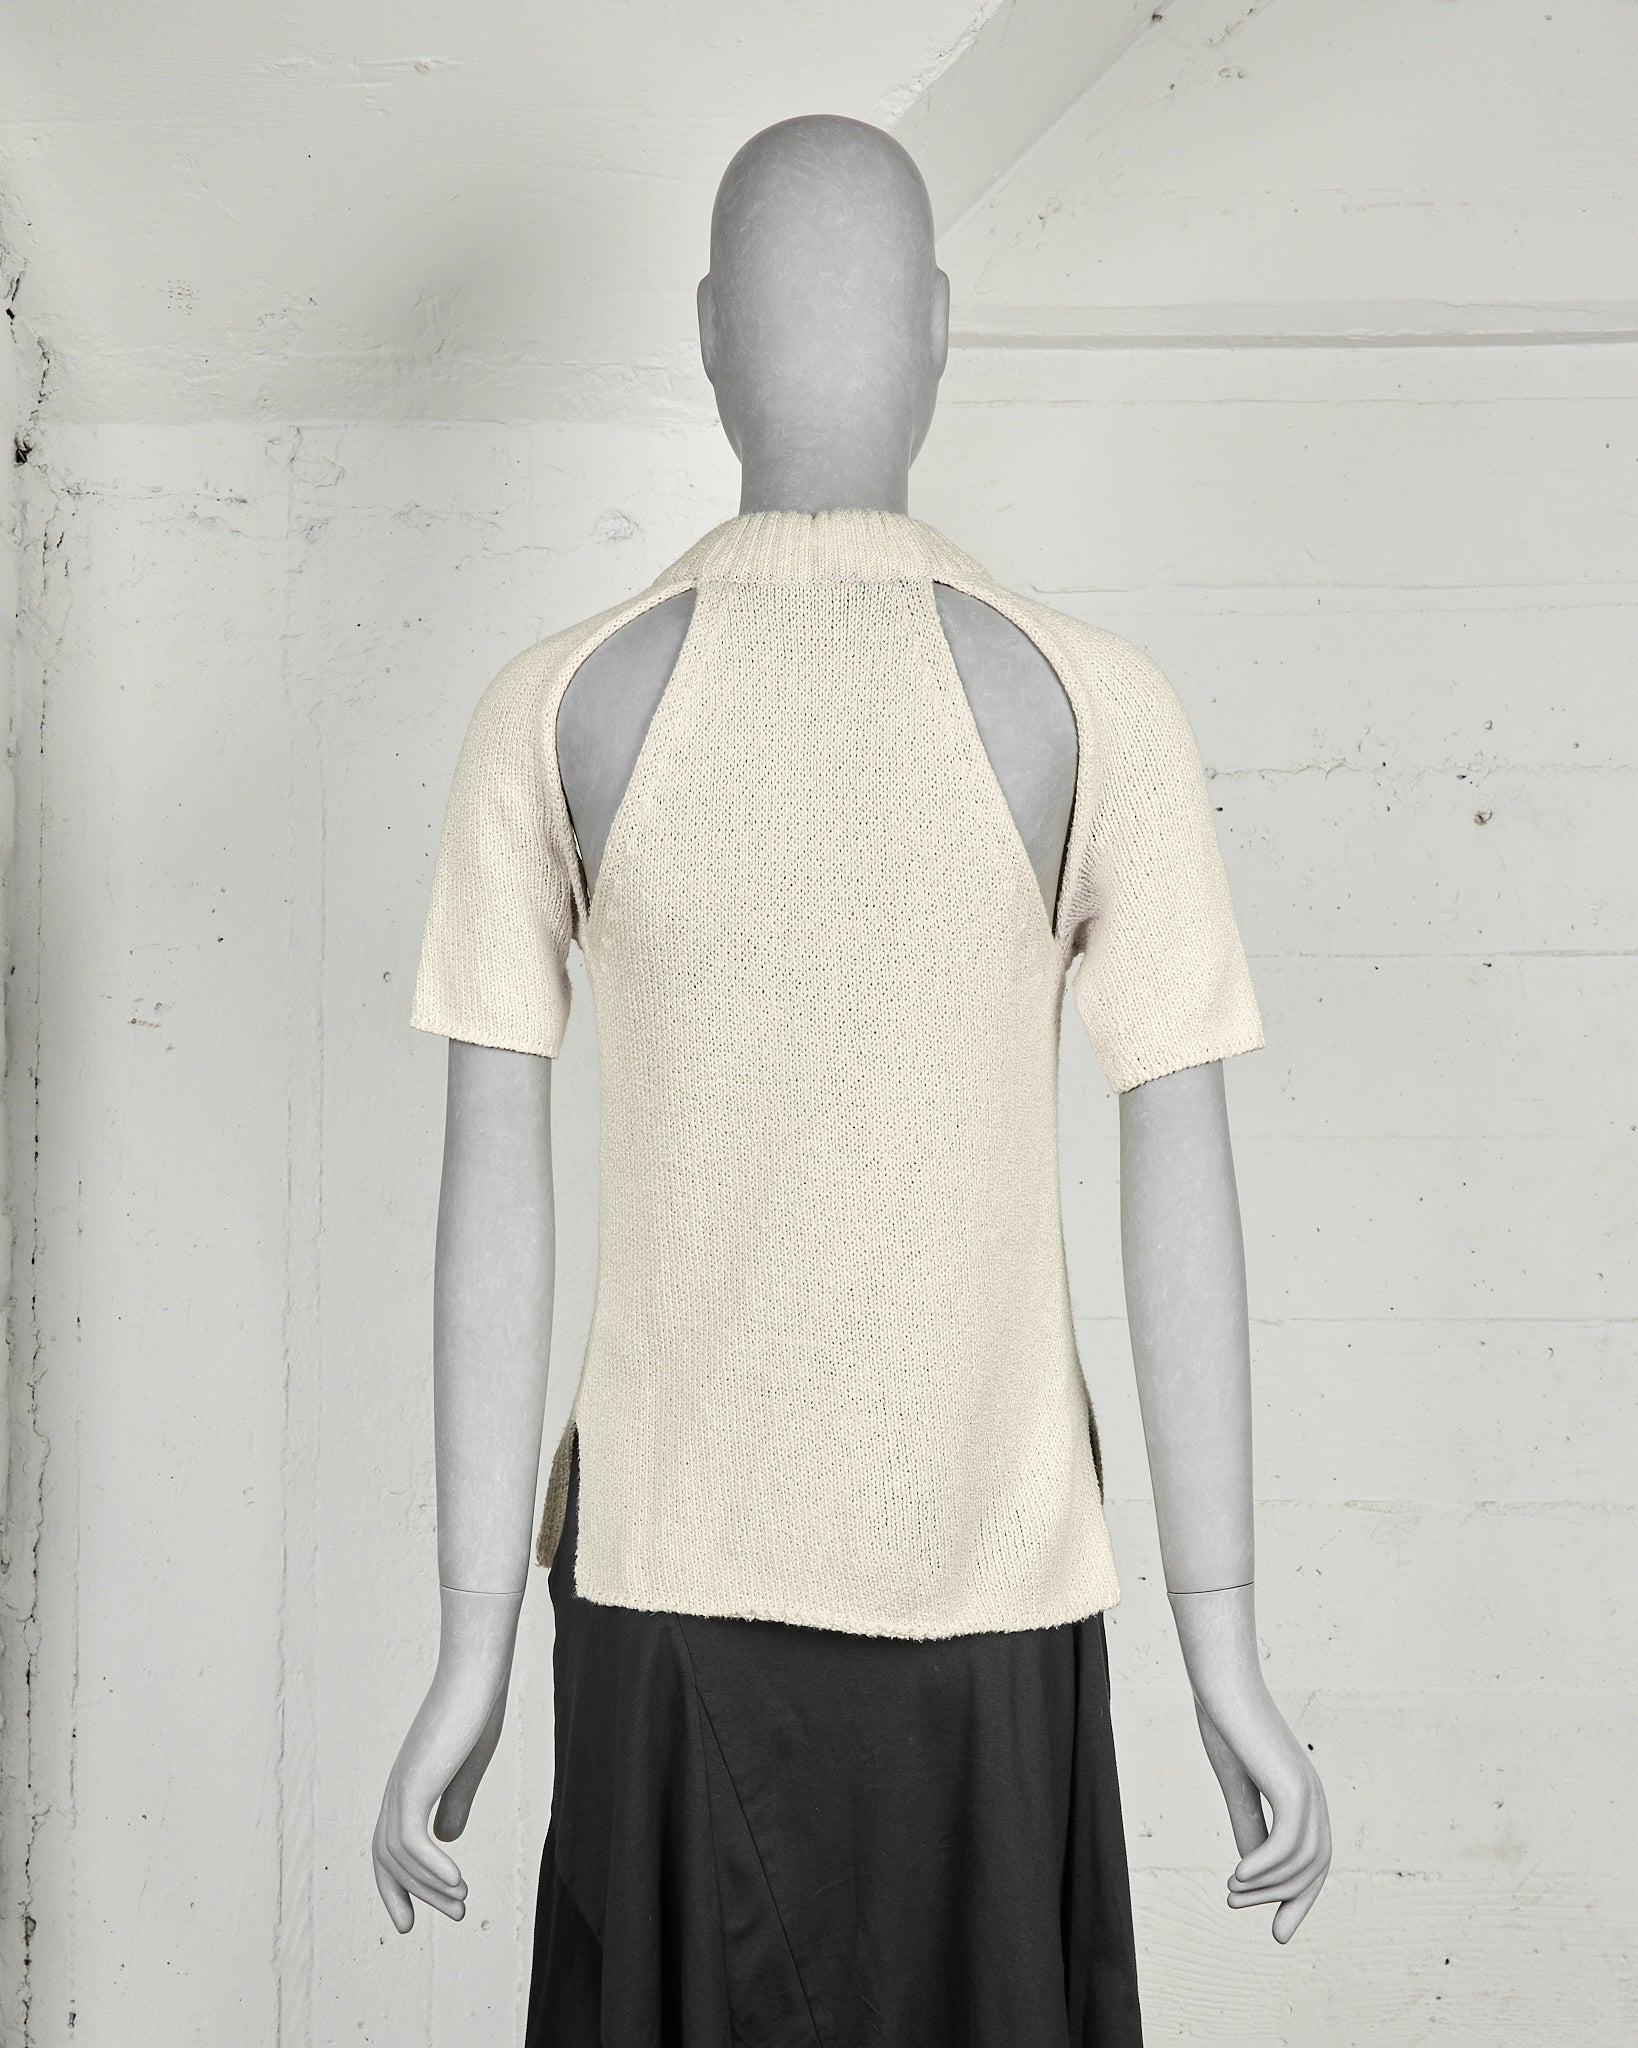 Celine by Phoebe Philo Cut-Out Short Sleeve Knitted Top - SILVER LEAGUE